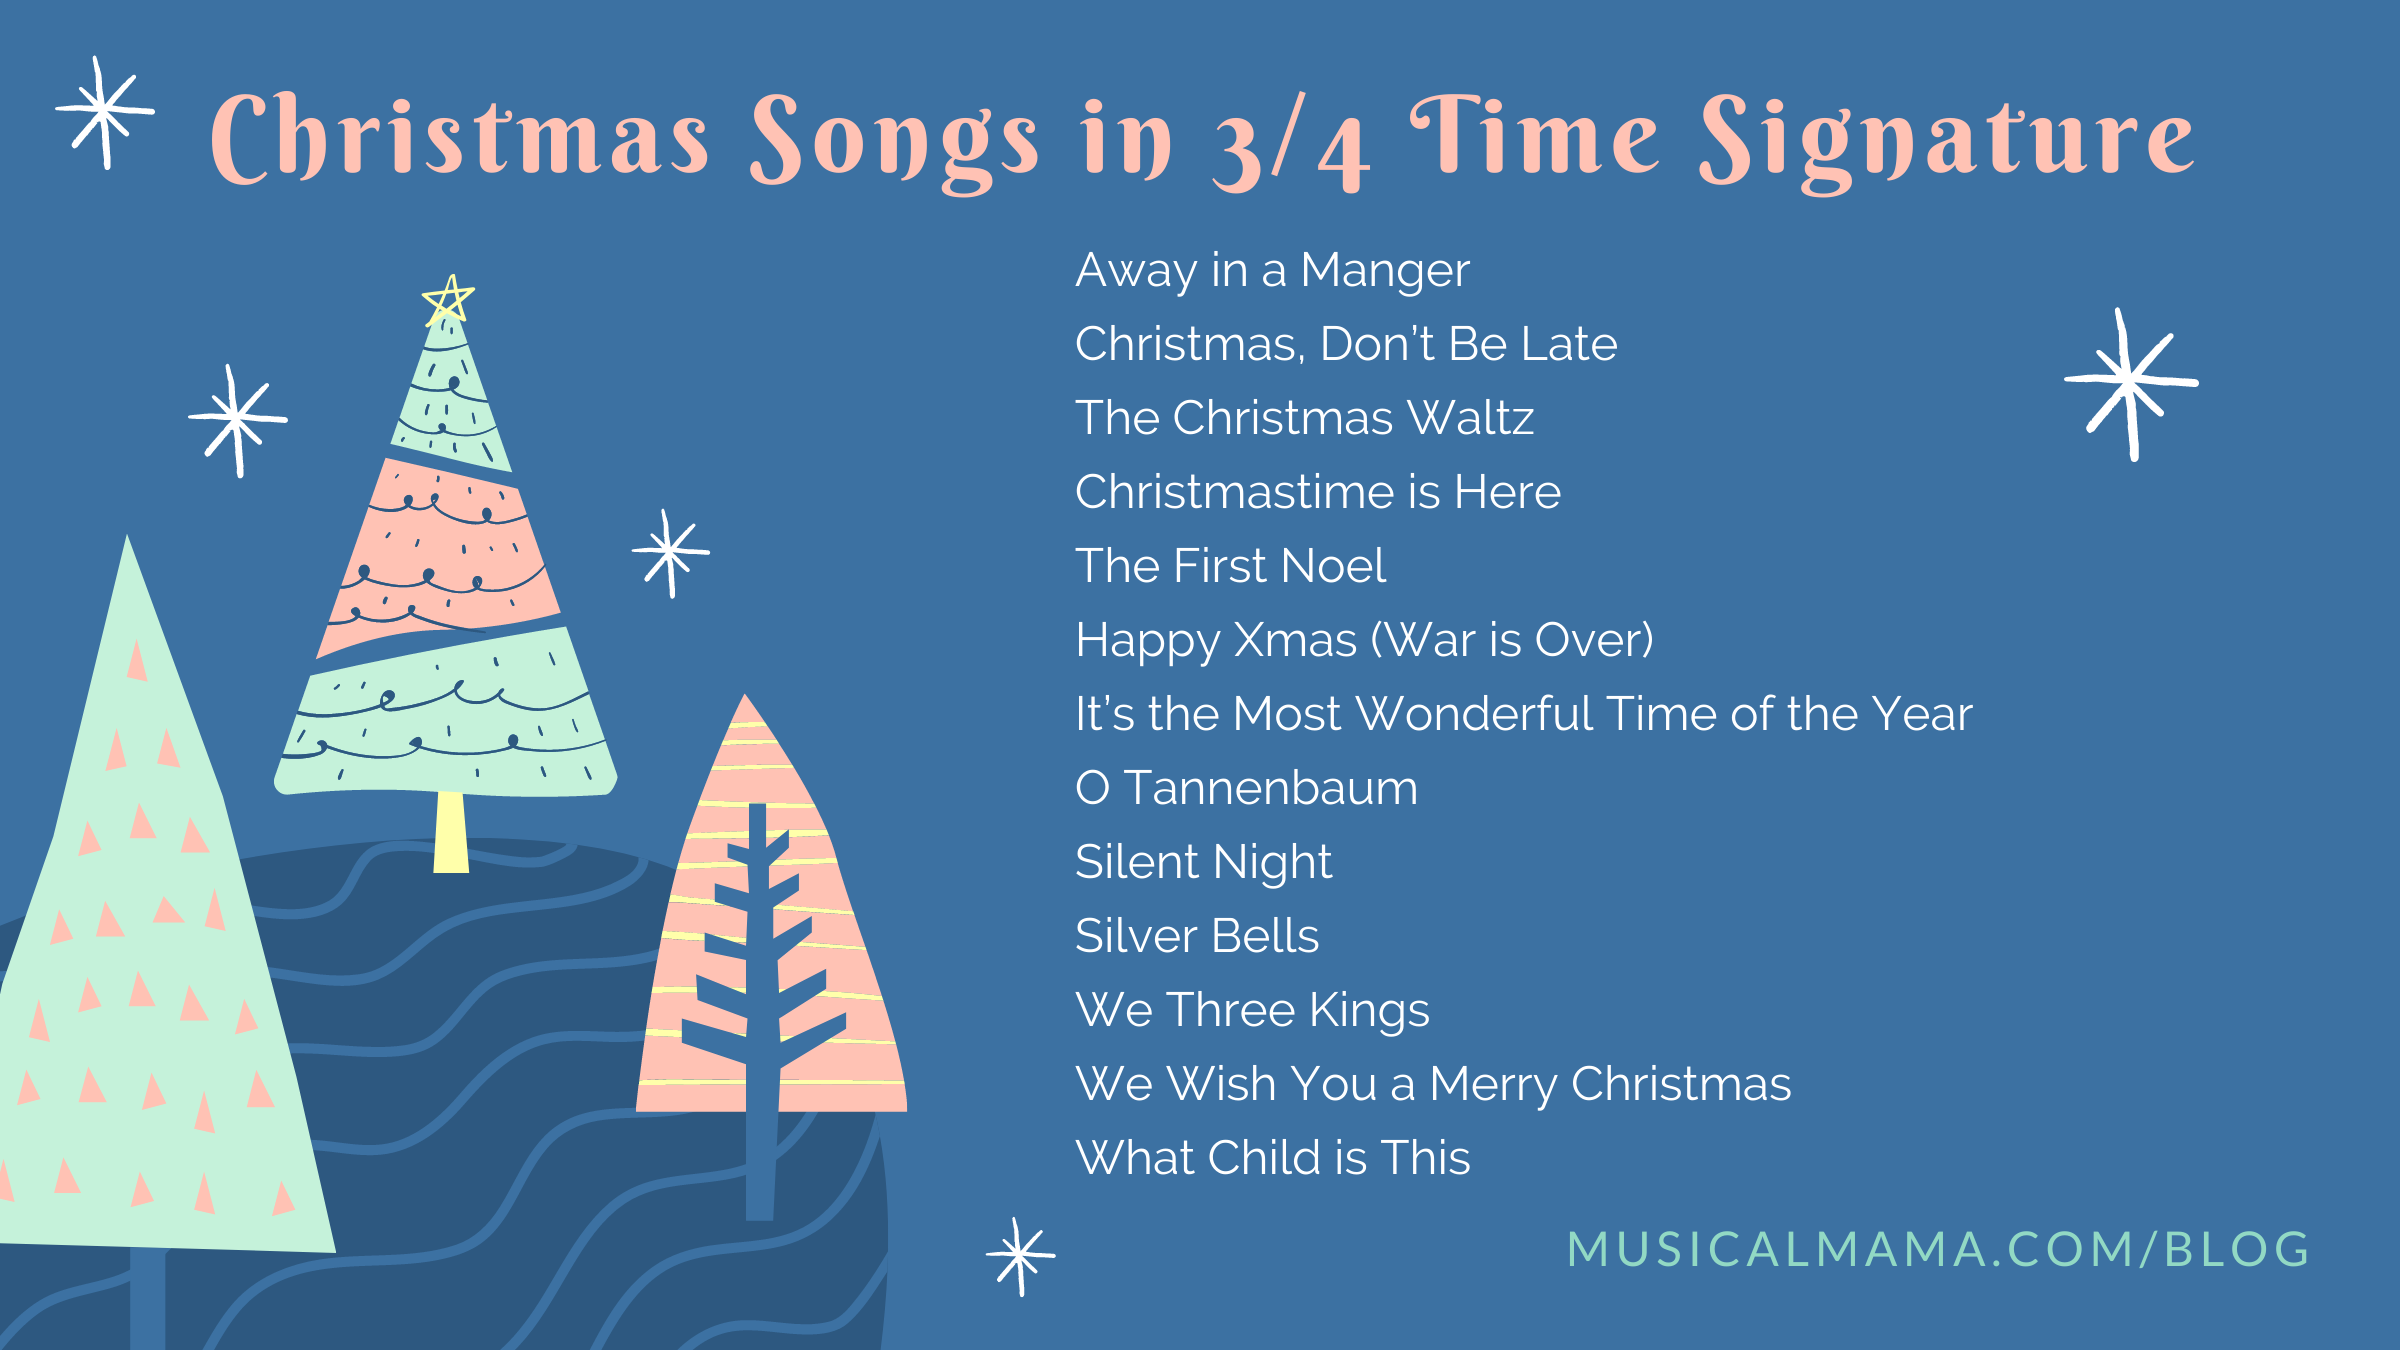 A List of Christmas Songs Set in 22/22 Time Signature — Musical Mama